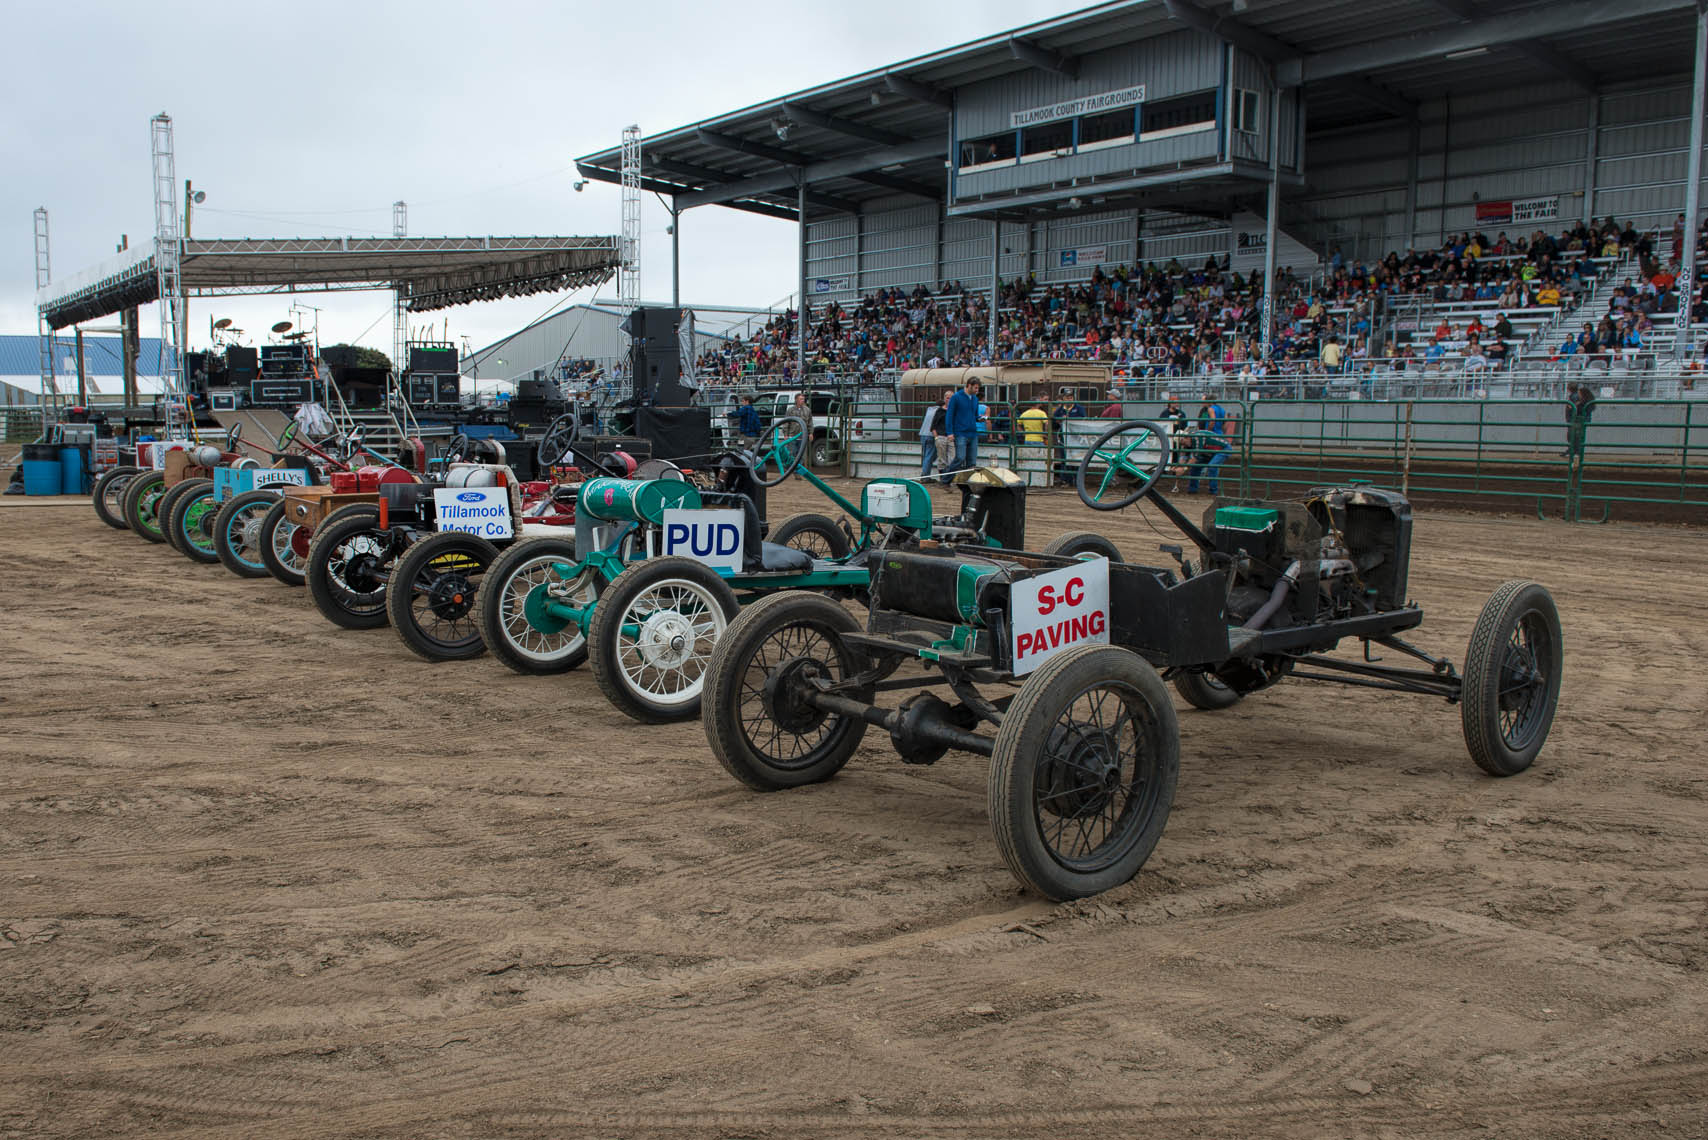 Pig and Ford Races, William Bragg, editorial photographer, Portland, Oregon